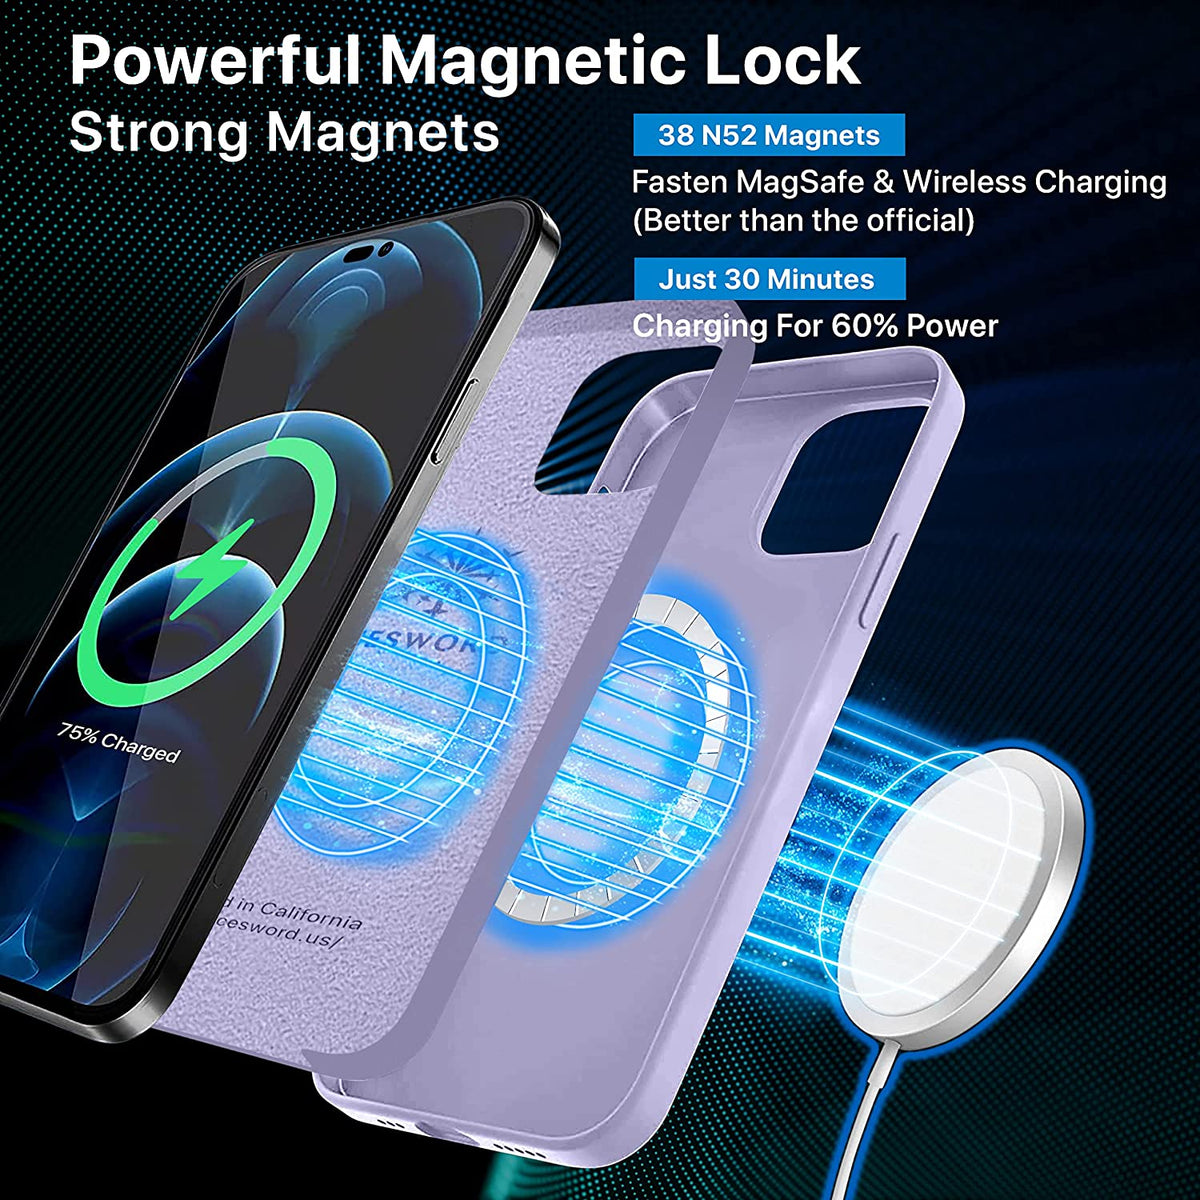 A smartphone uses up to 14 magnets!